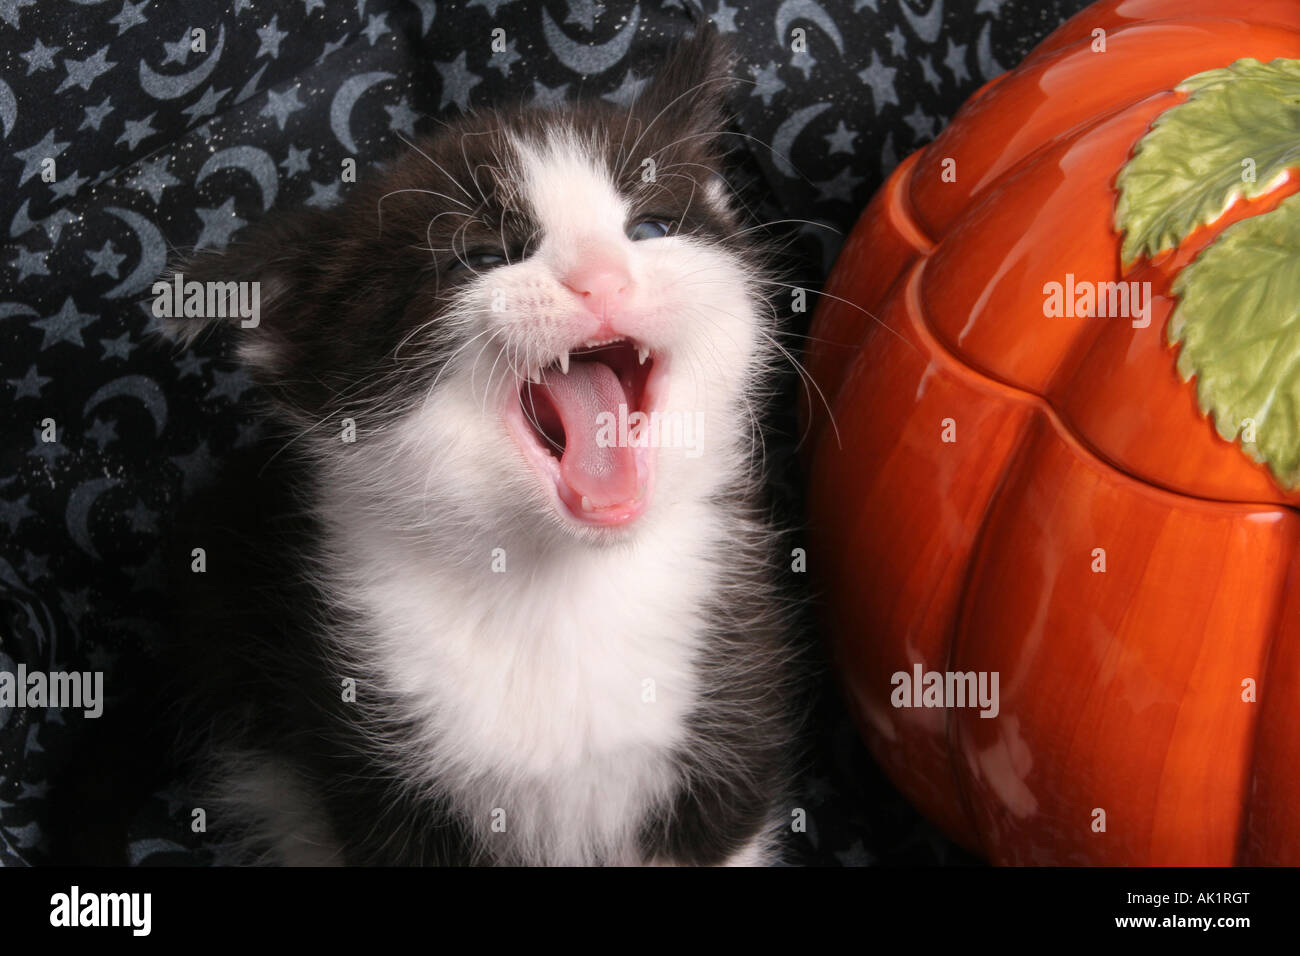 A black and white domestic kitten sitting next to a ceramic pumpkin at Halloween Holiday season yawning Stock Photo